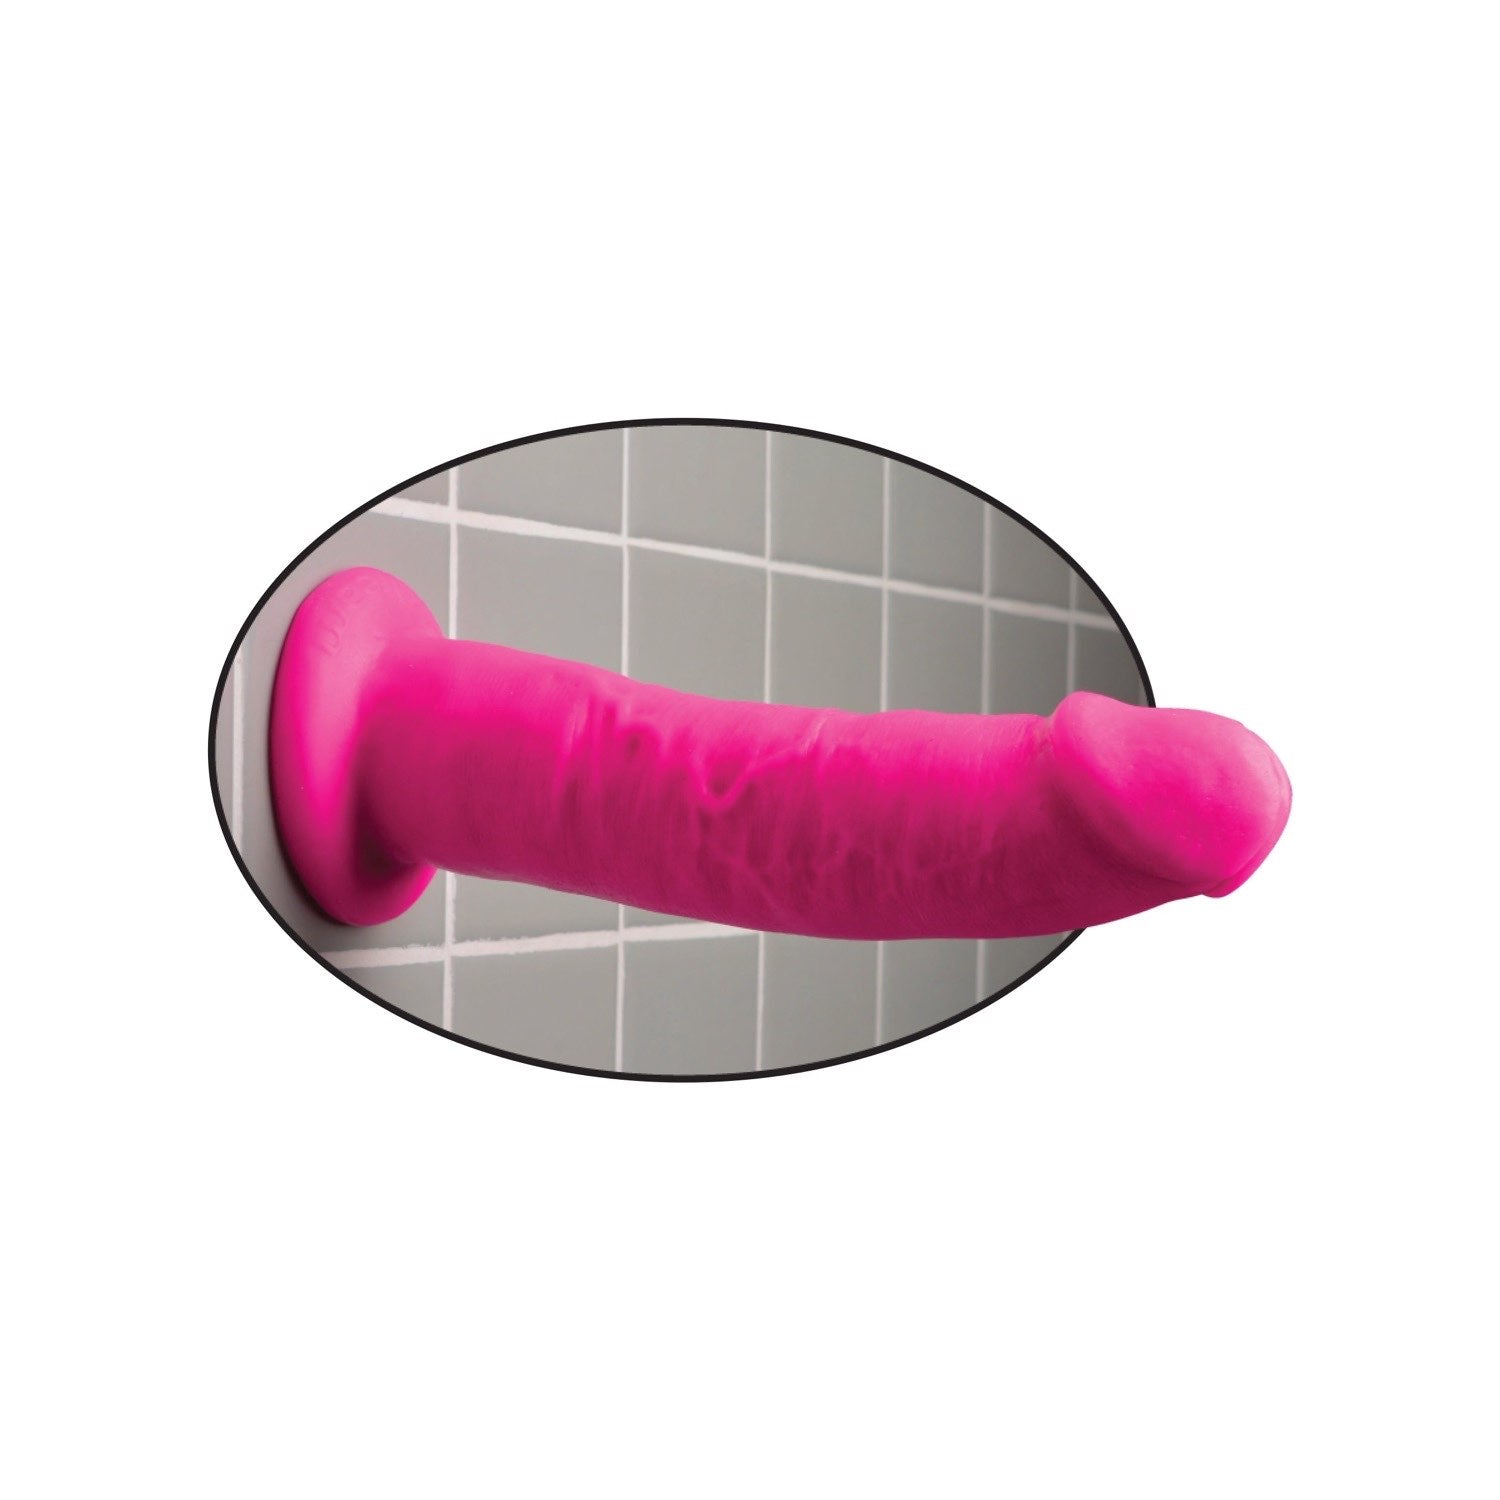 Dillio 9&quot; Dildo - Pink 22.9 cm Dong by Pipedream